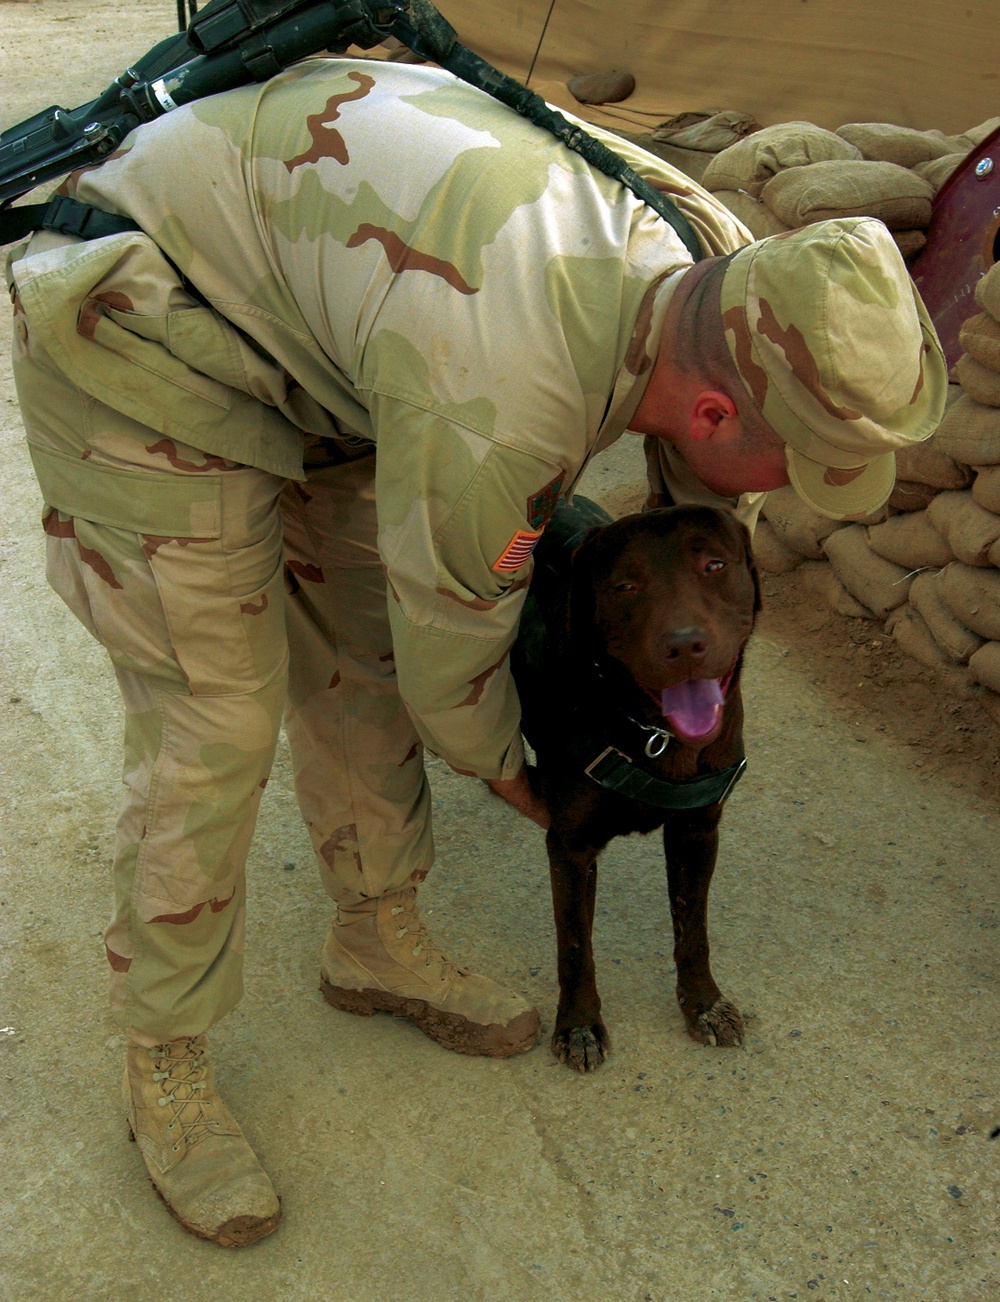 Sgt. McKee Helps Staff Sgt. Archie Into His Work Harness